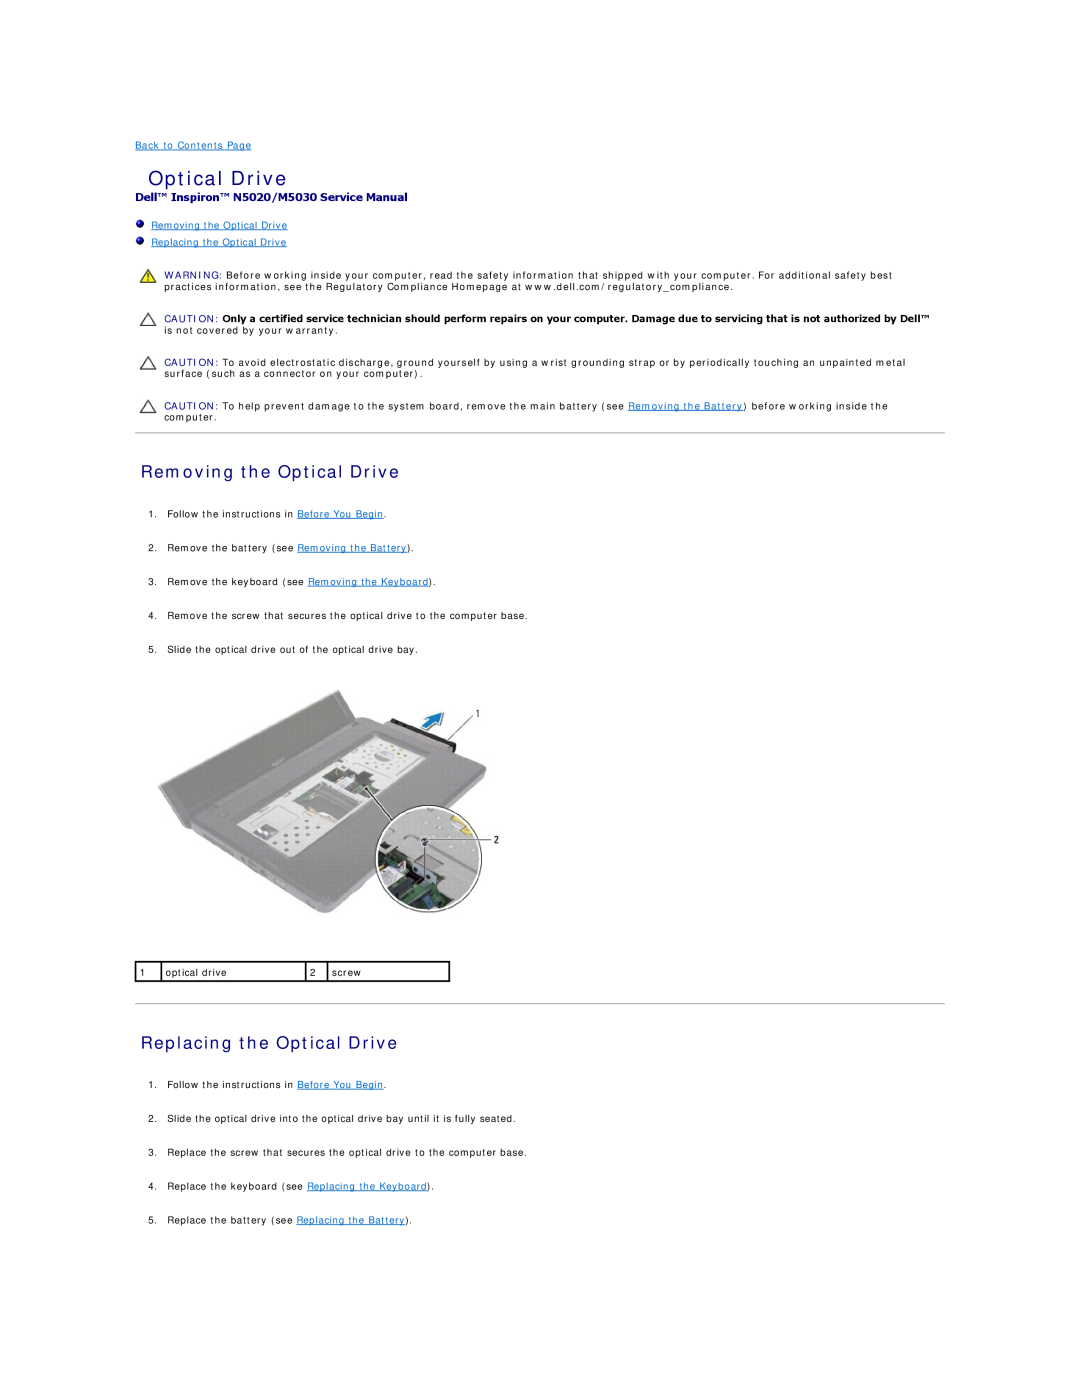 Dell 1121 manual Removing the Optical Drive, Replacing the Optical Drive, Dell Inspiron N5020/M5030 Service Manual 